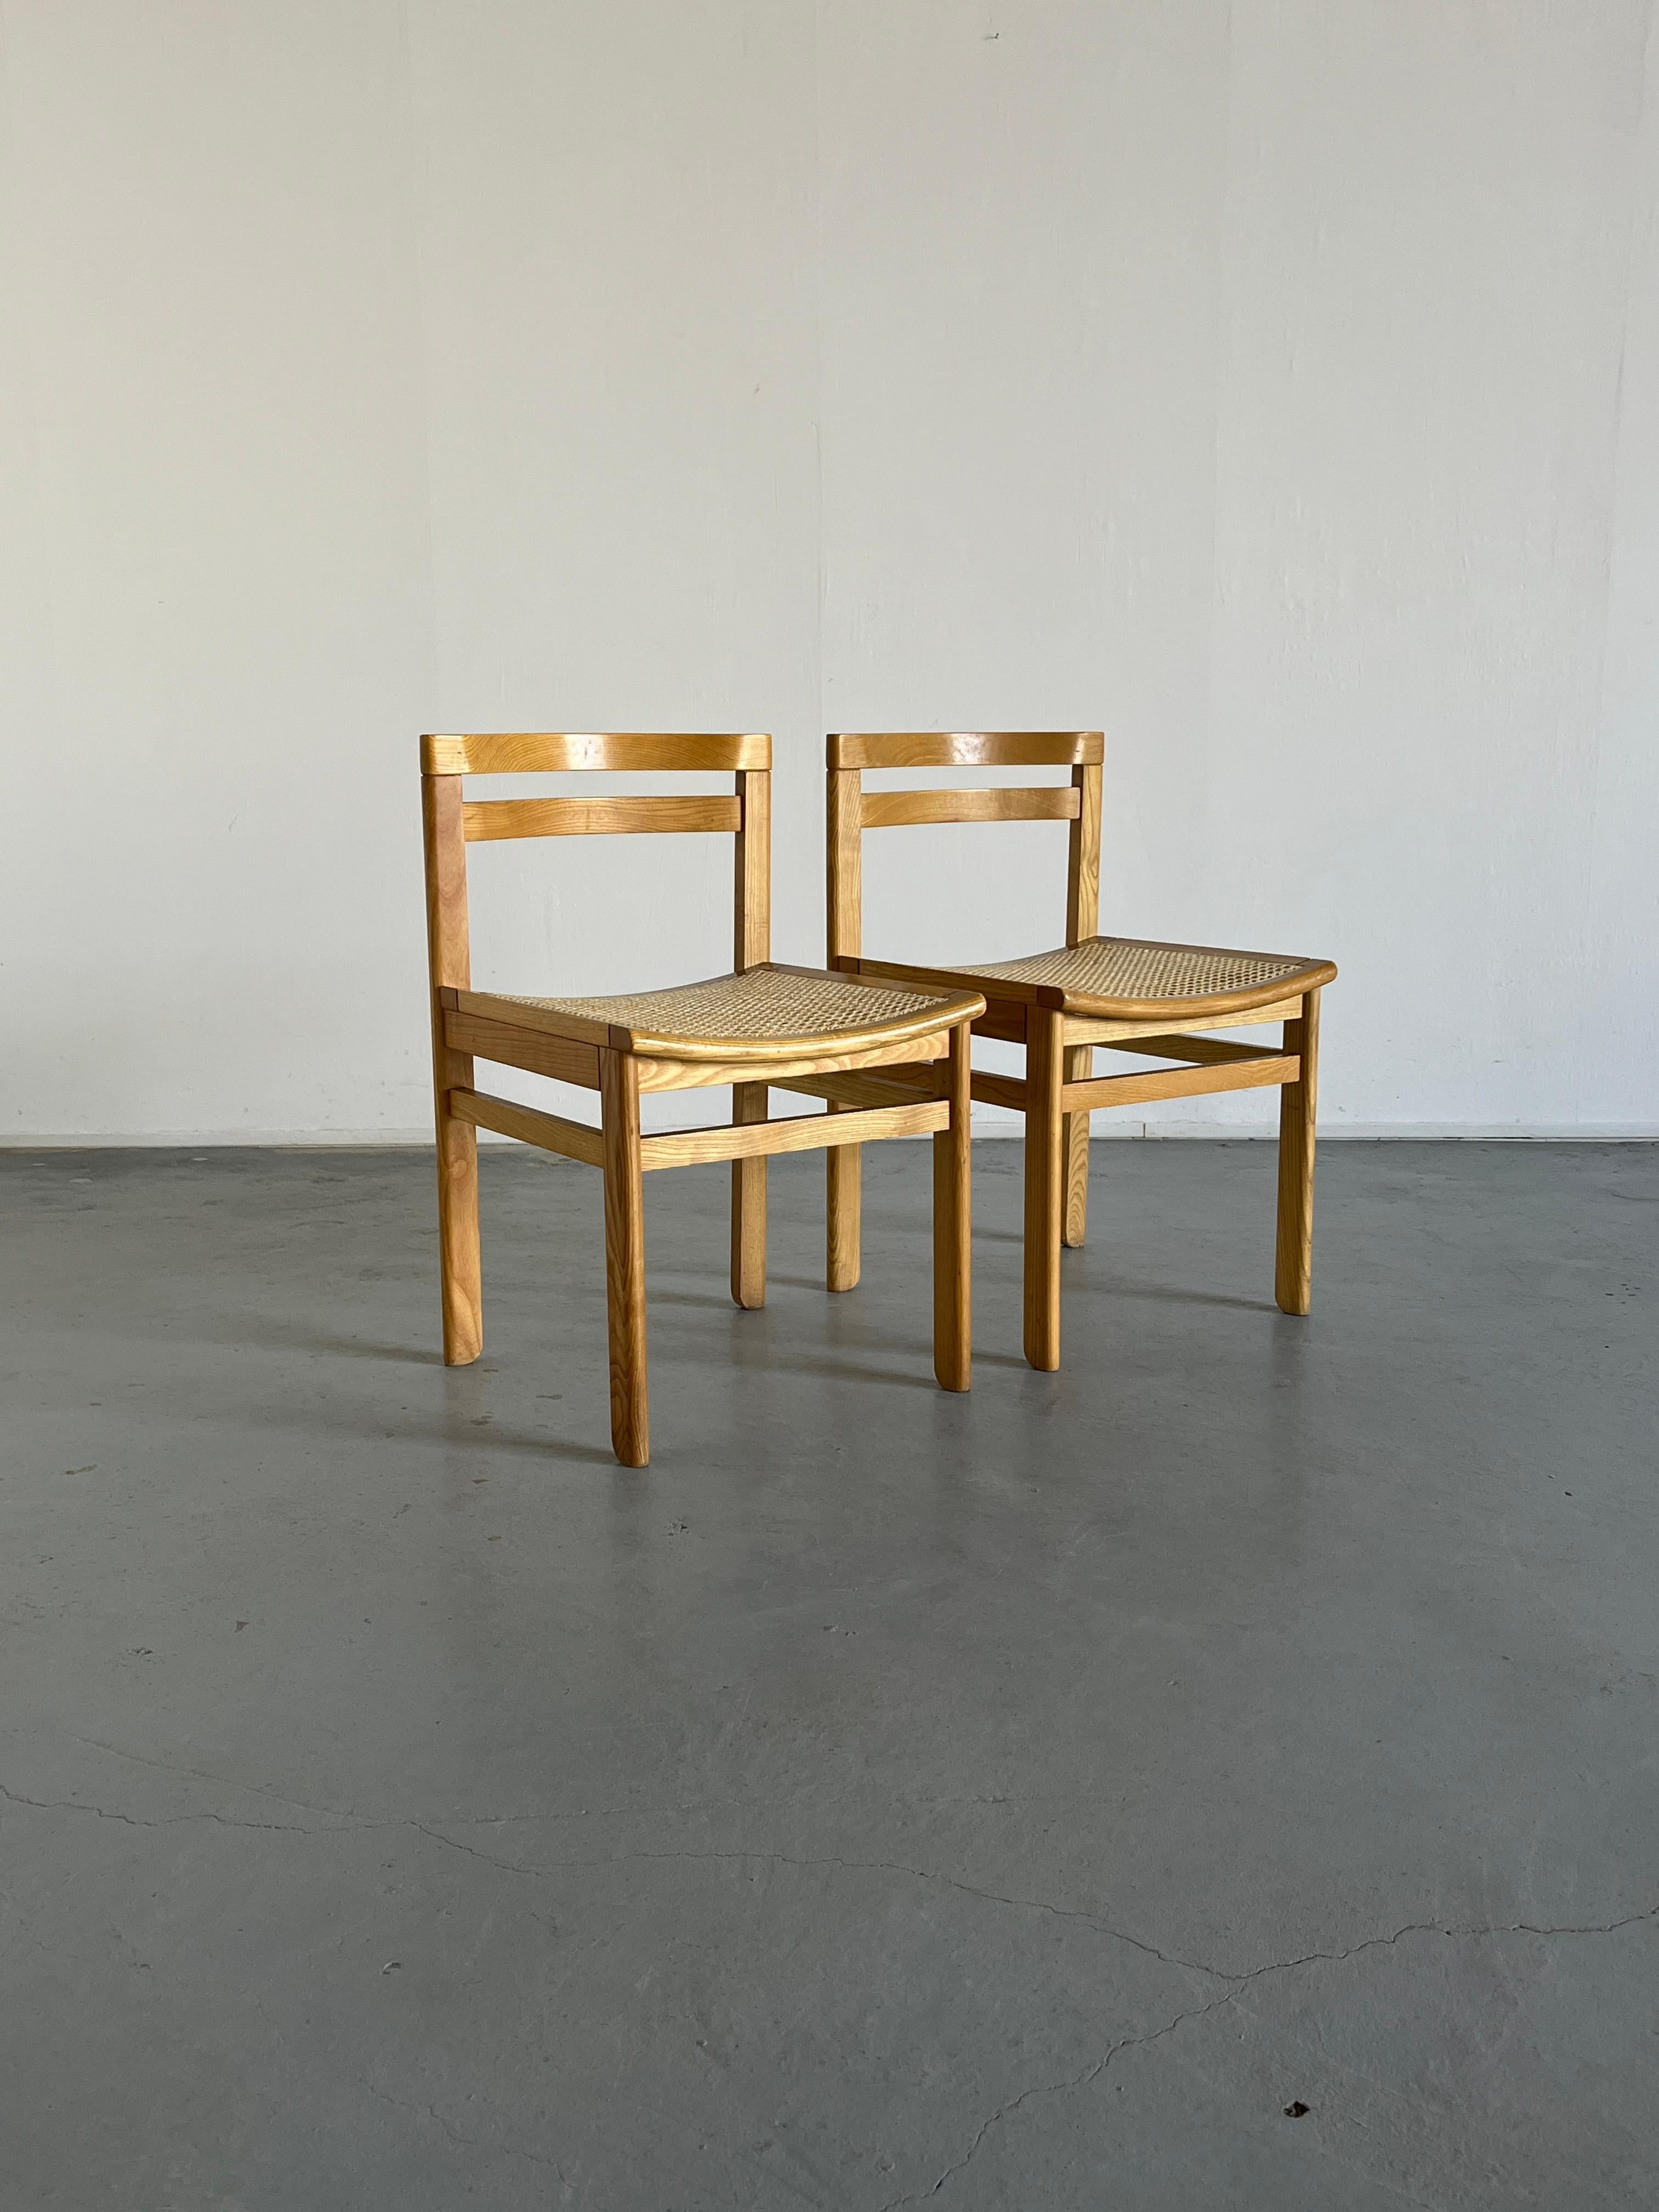 Beautiful and elegant wood and cane Mid-Century-Modern constructivist dining chairs, in European beechwood and with wicker cane seat. Elegant and simple design. Would fit well in a natural soft interior with nude tones and hints or rustic modern